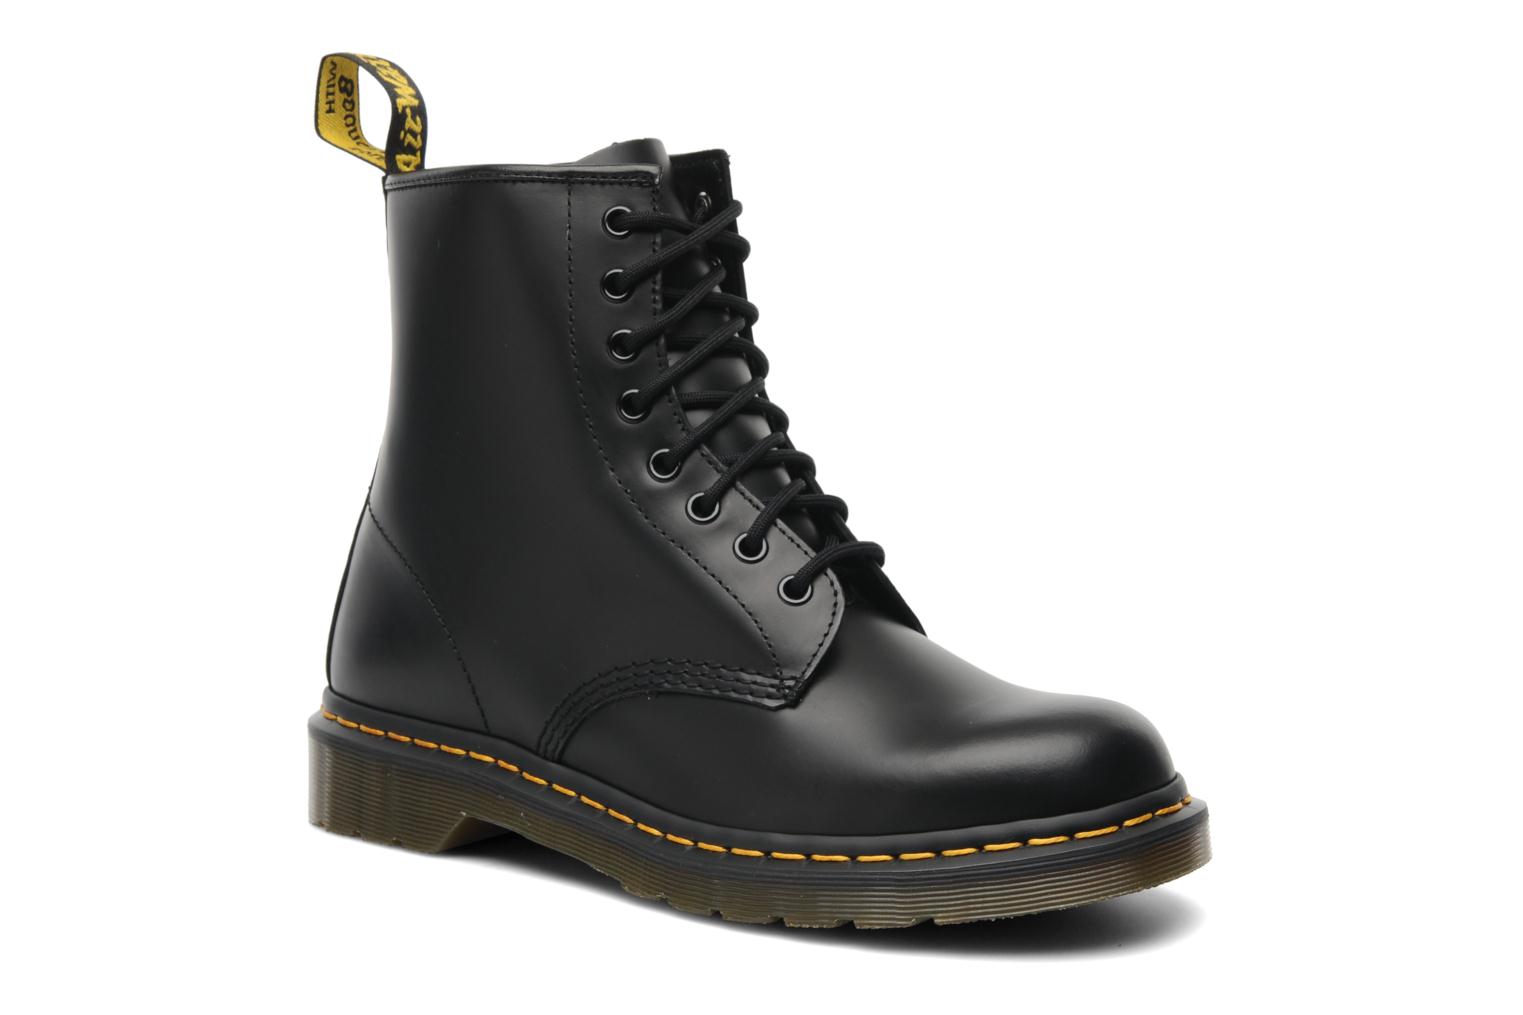 1460 Black Smooth Boots